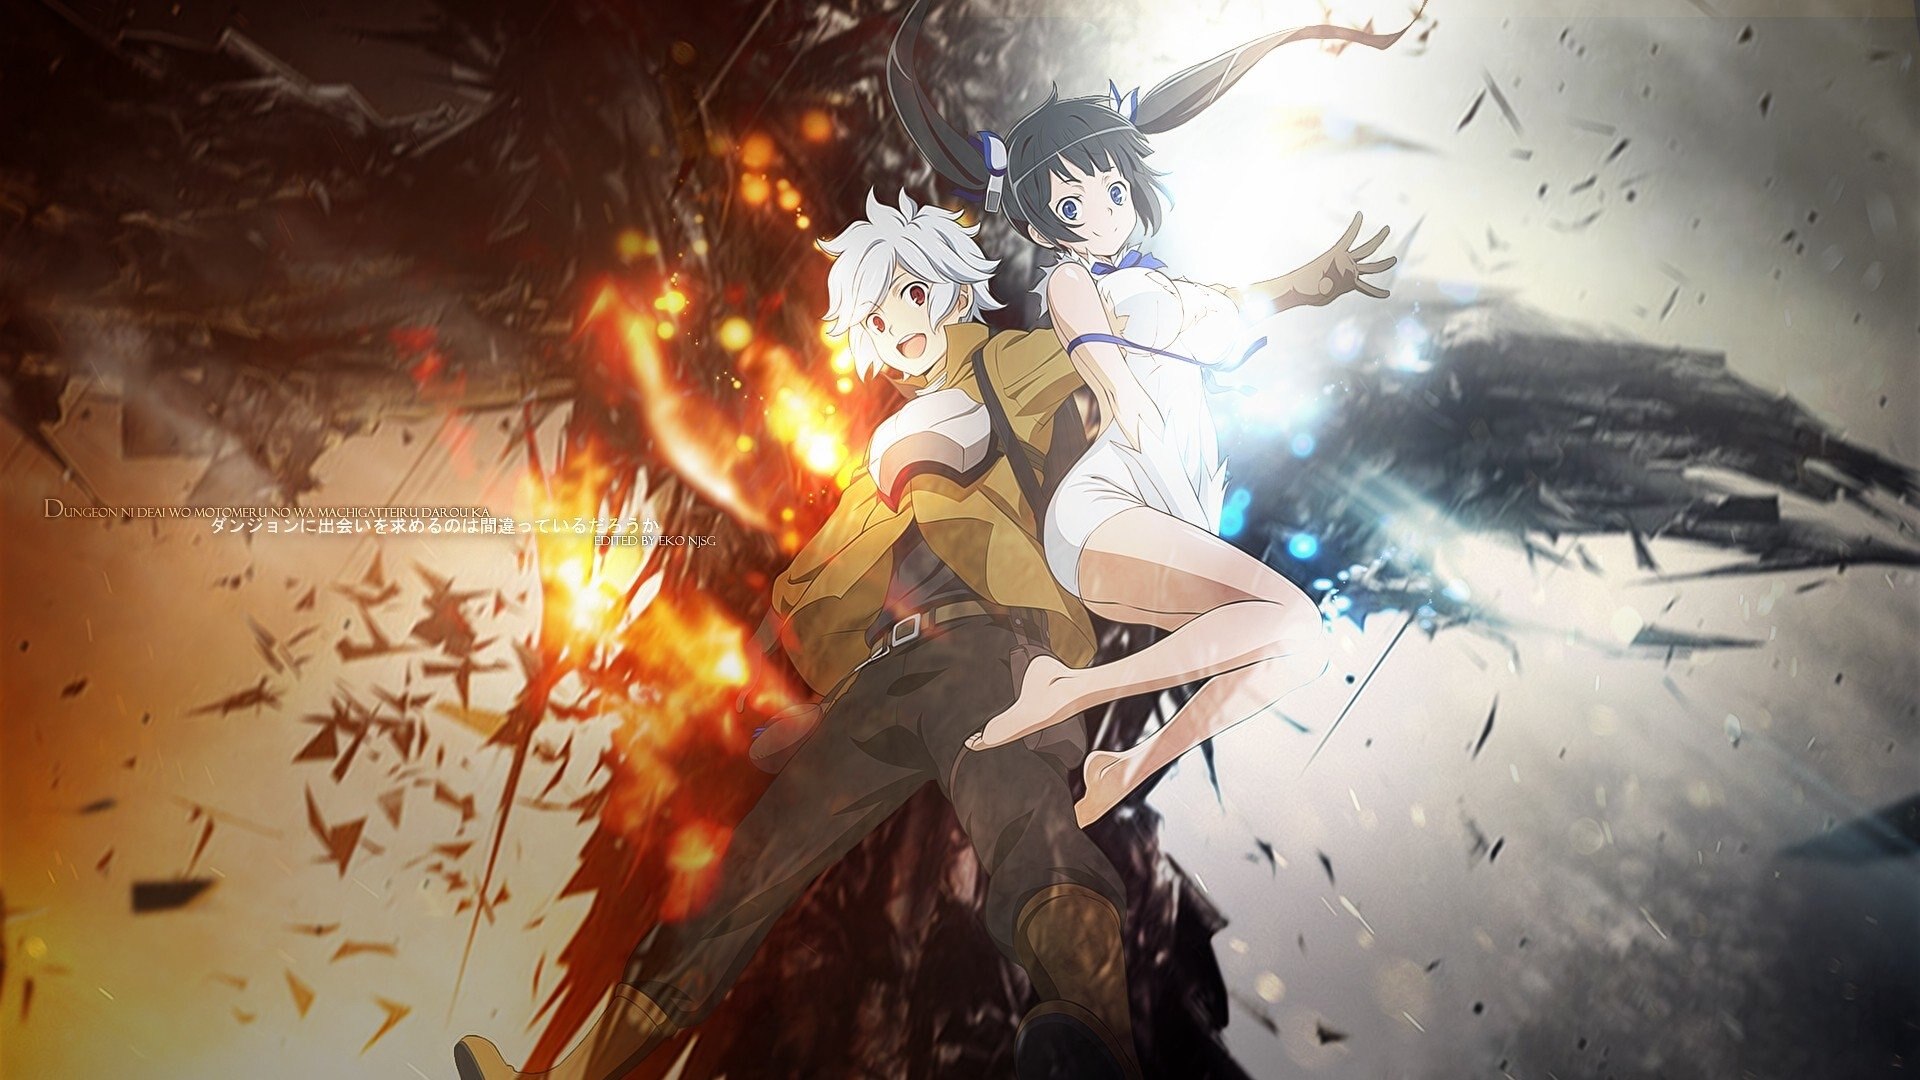 Danmachi] Bell's Growth on the official website : r/anime